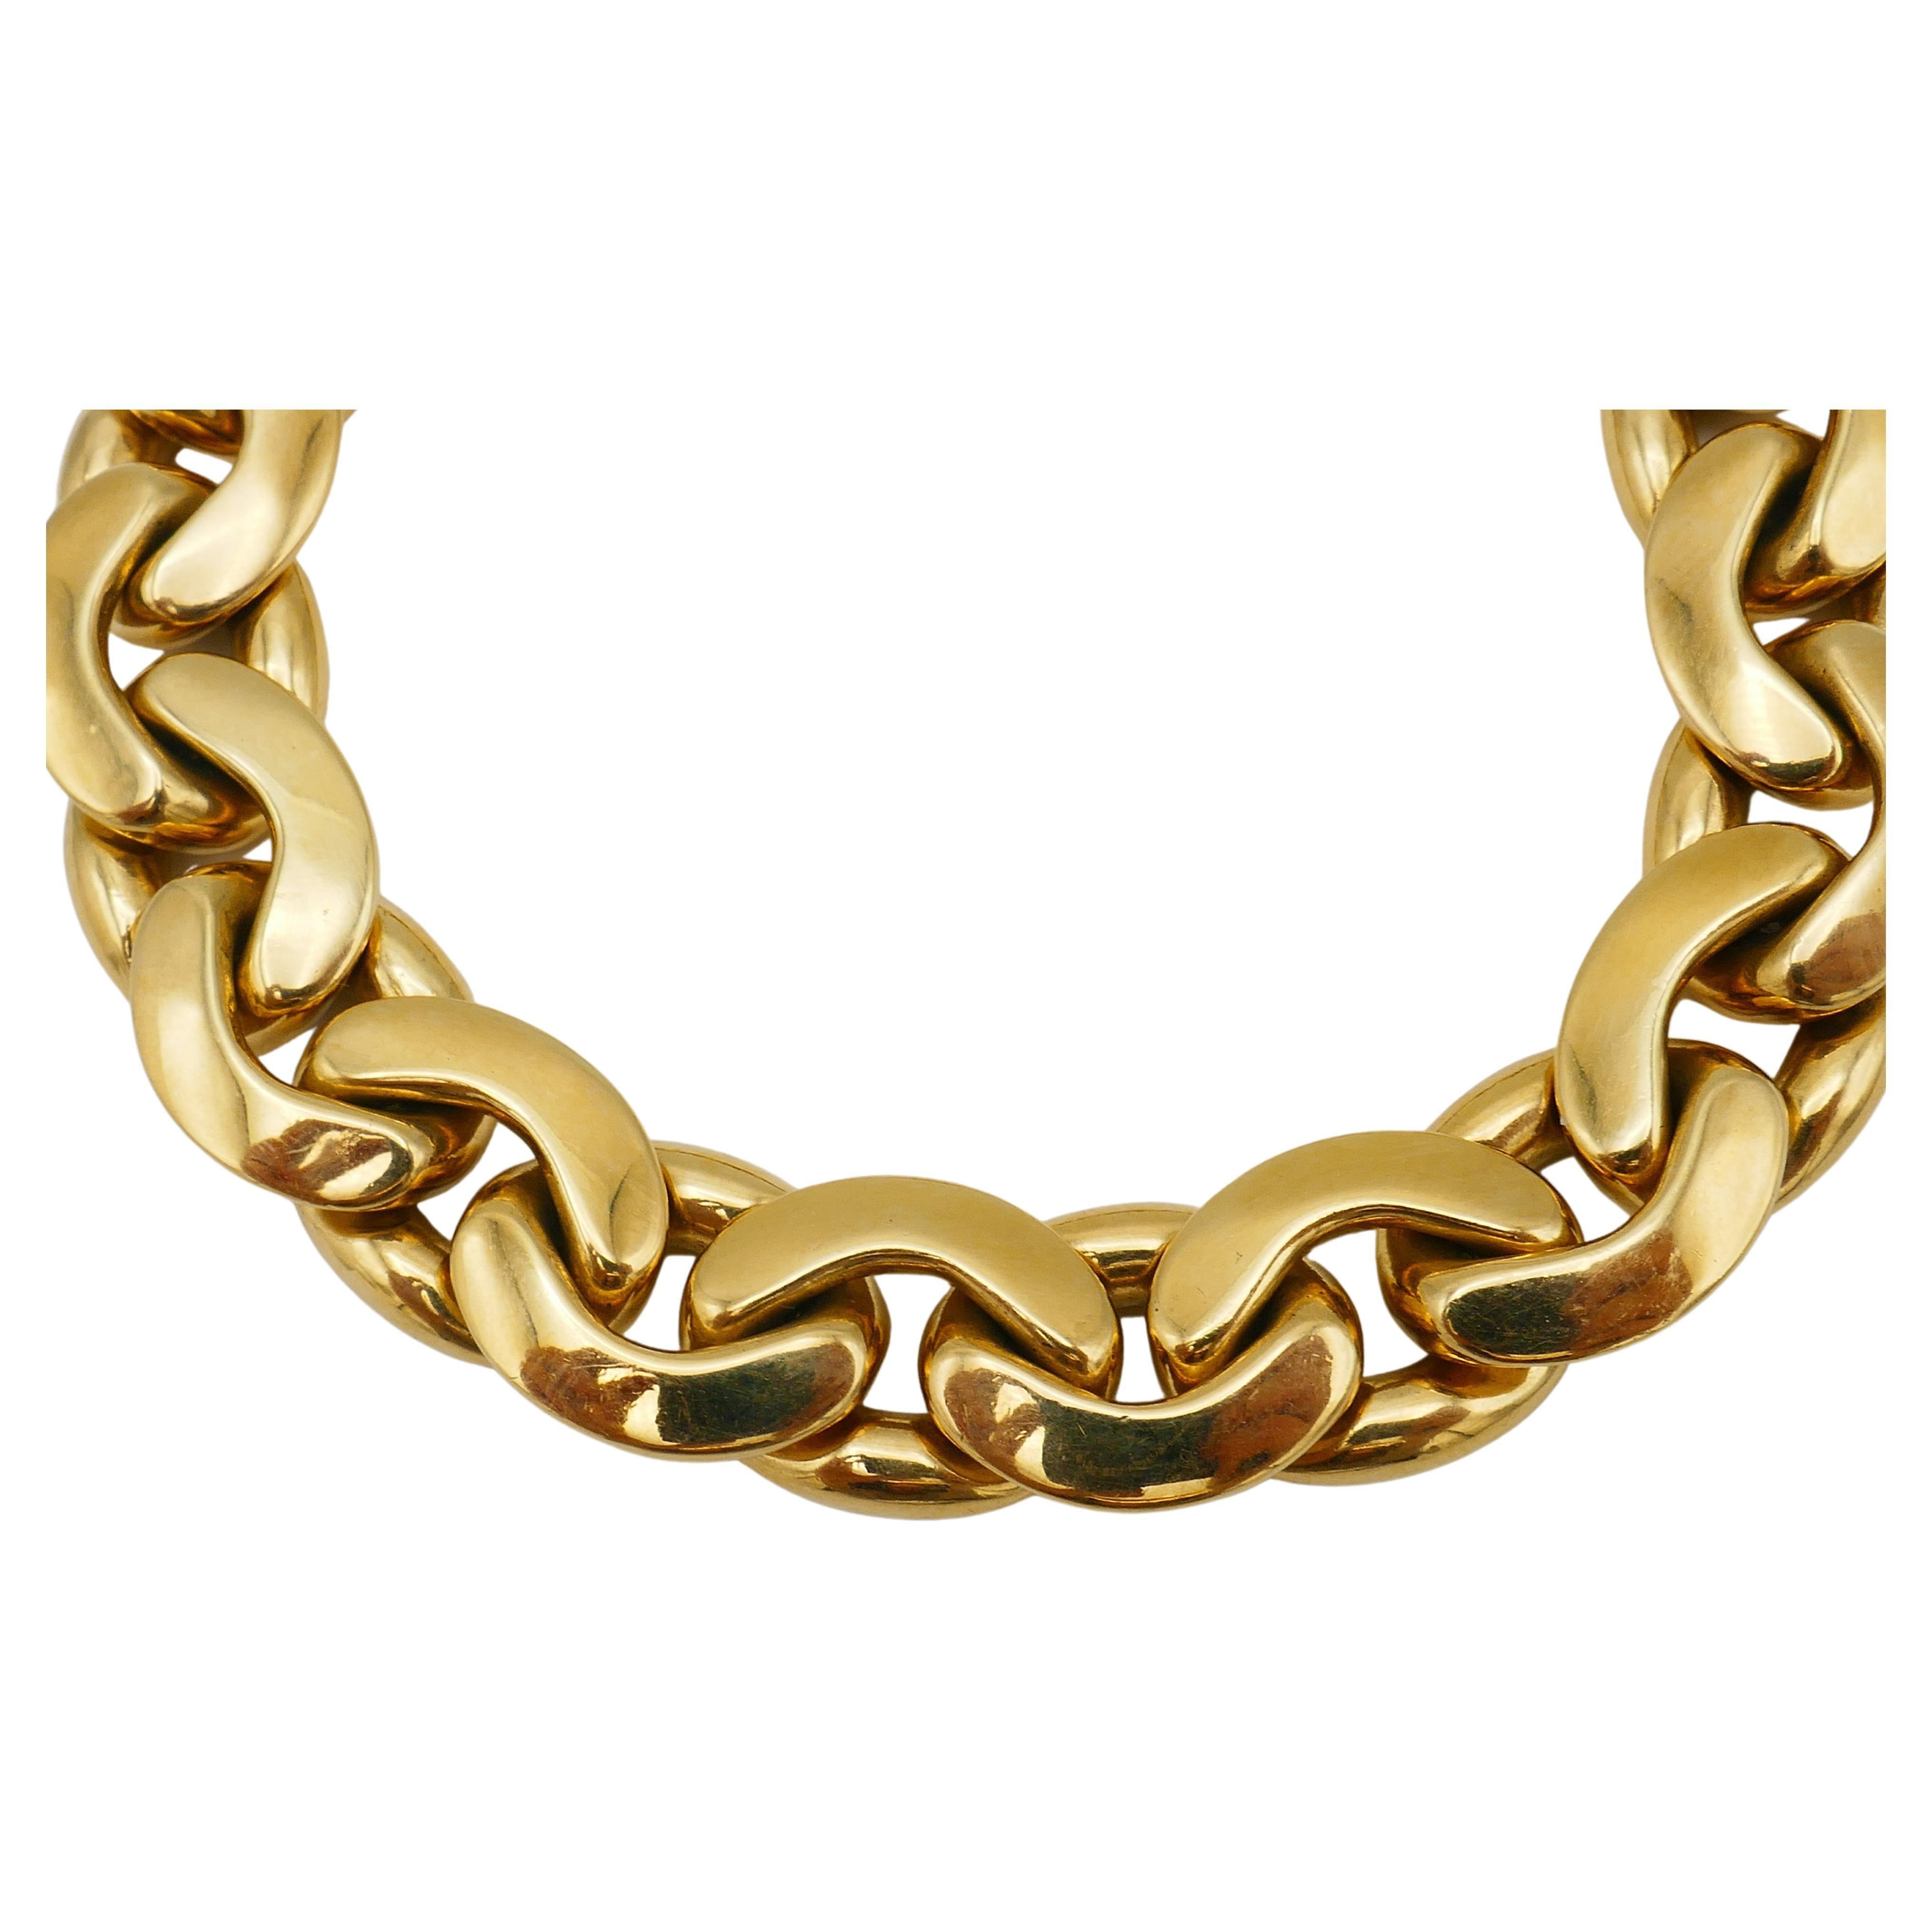 A vintage heavy yet flat link chain bracelet by Tiffany & Co. Made of 18k gold.
Stamped with Tiffany maker's mark, a hallmark for 18k gold and a country of origin (Italy).  
Measurements: 8 1/4